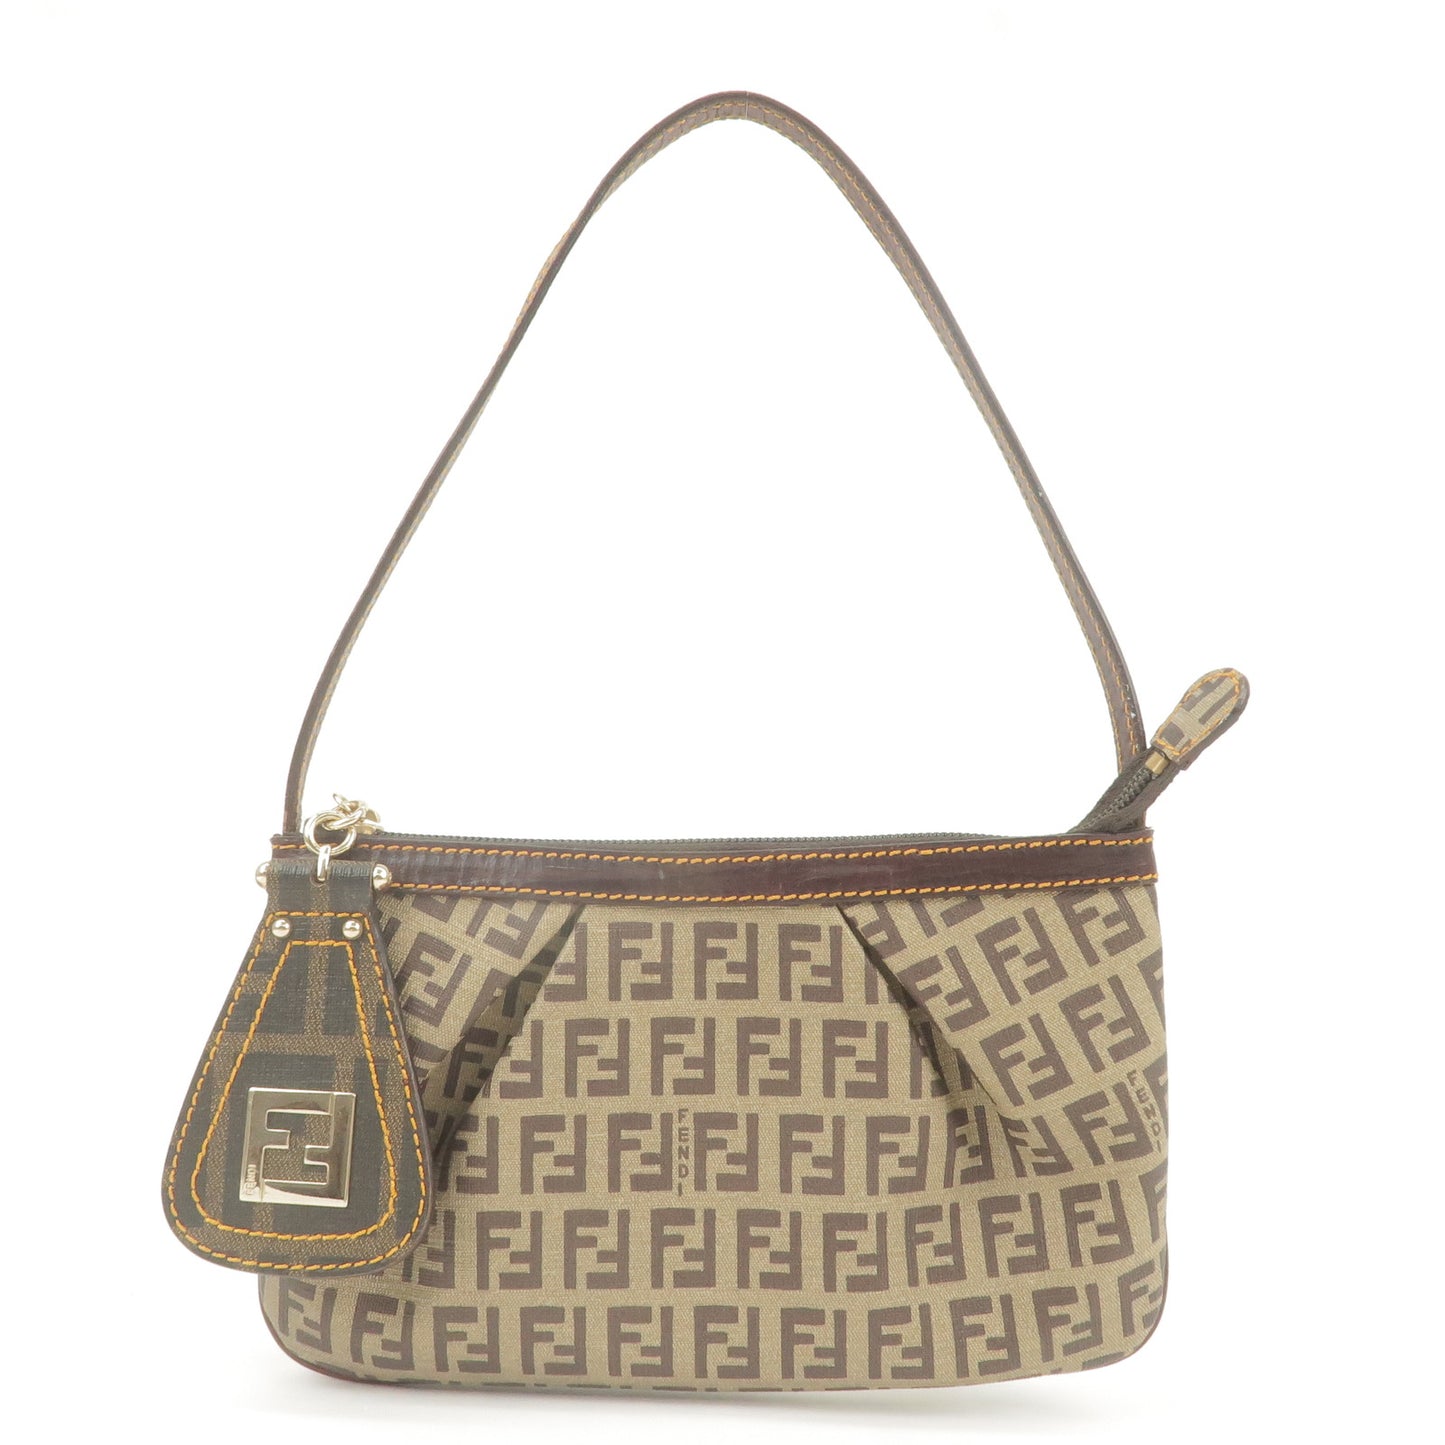 *EARLY-ACCESS*-FENDI-Zucchino-PVC-Leather-Shoulder-Bag-Beige-Brown-8BR566